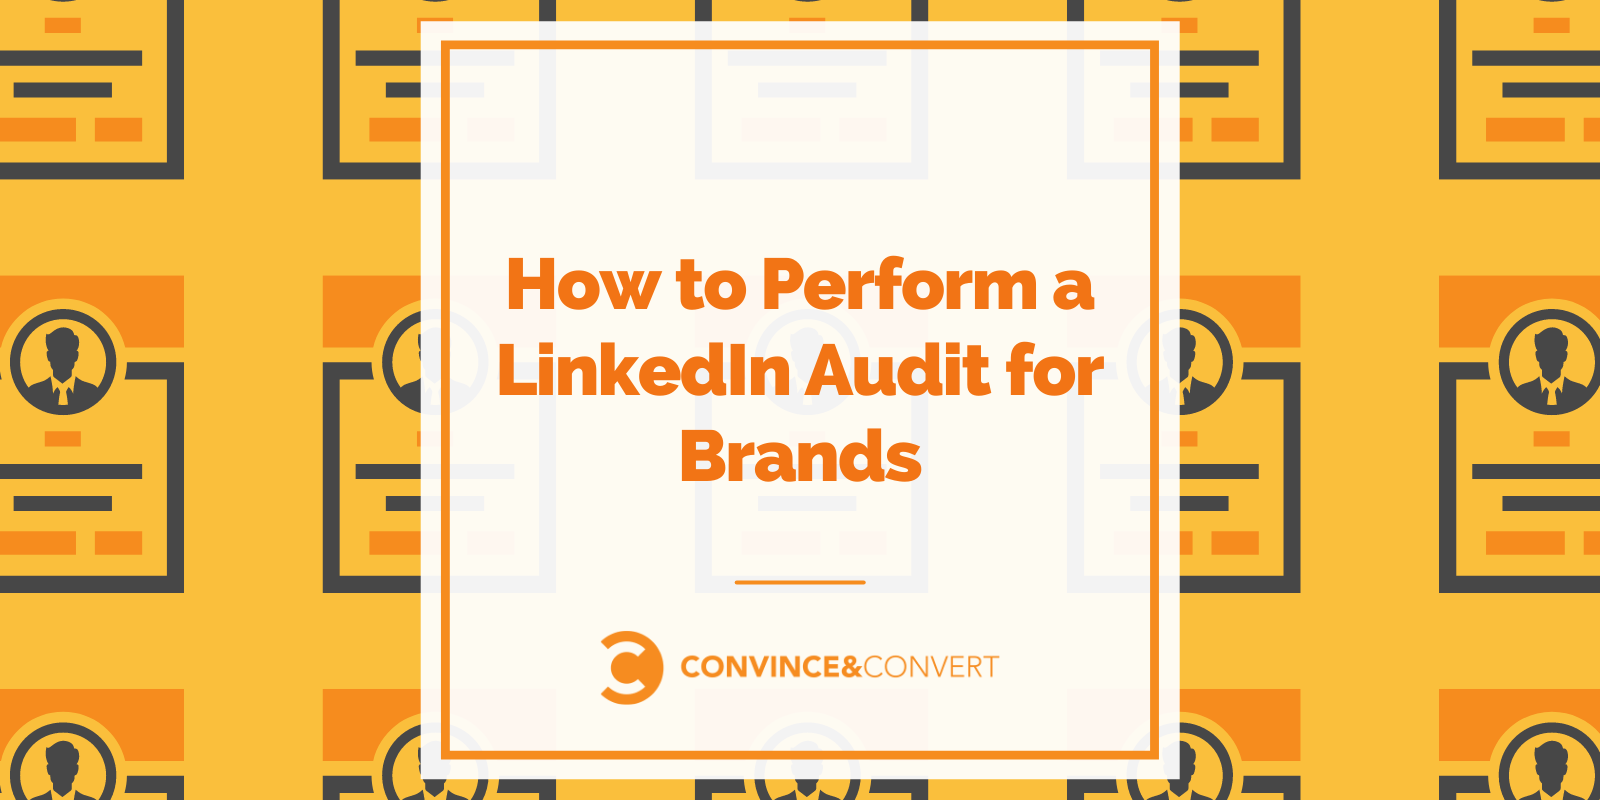 How one can Manufacture a LinkedIn Audit for Brands